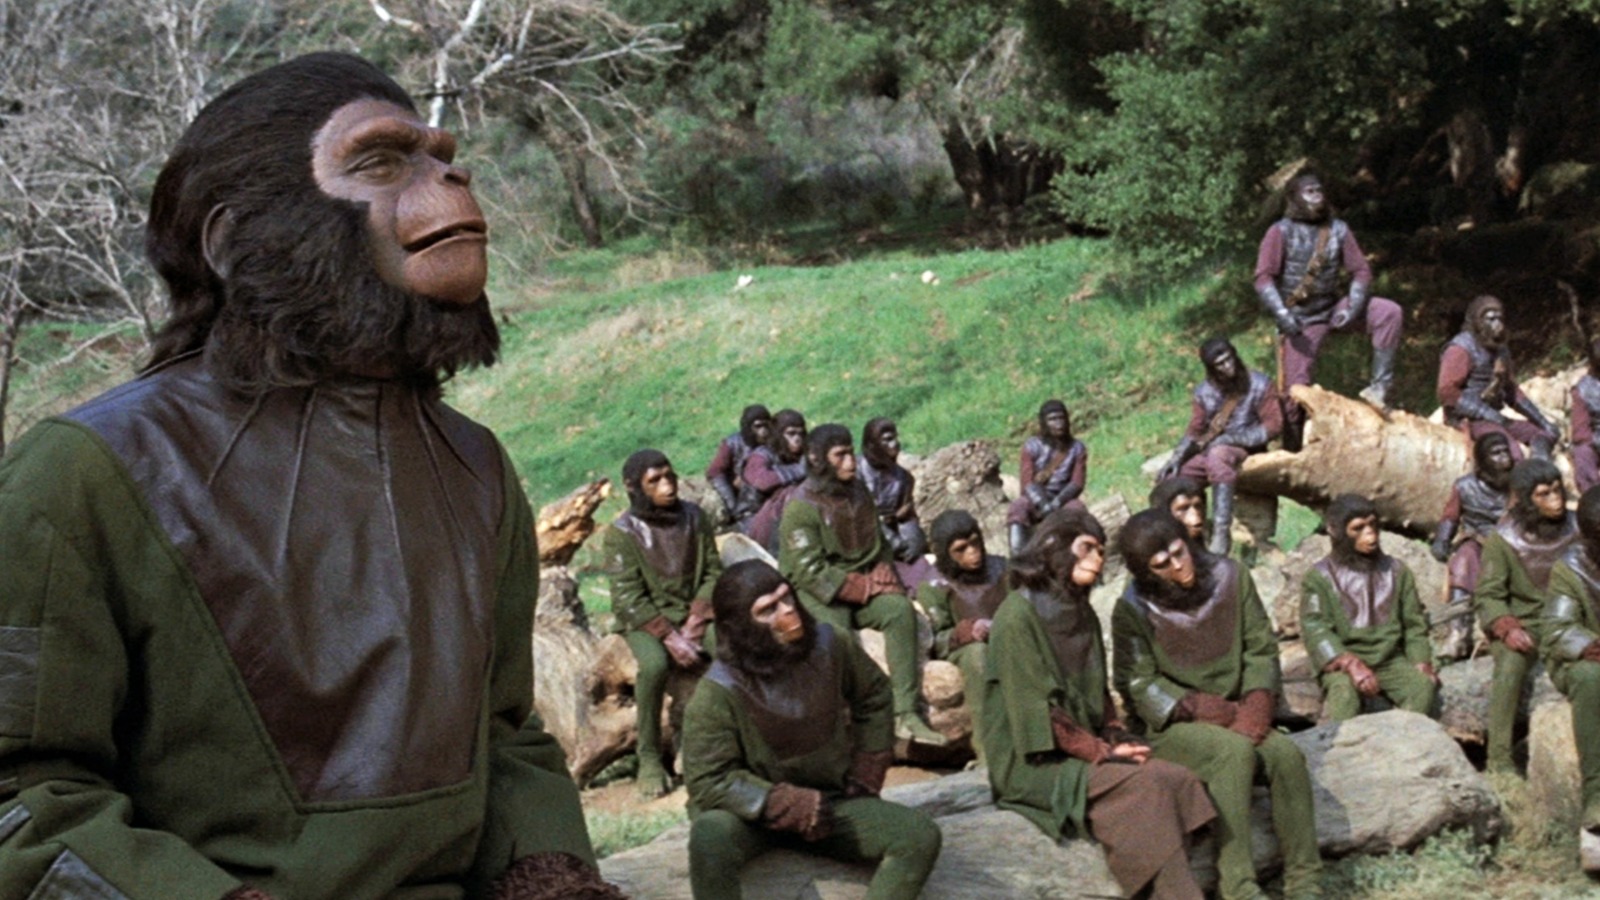 One Planet Of The Apes Movie Has An Embarrassingly Low Rotten Tomatoes Score